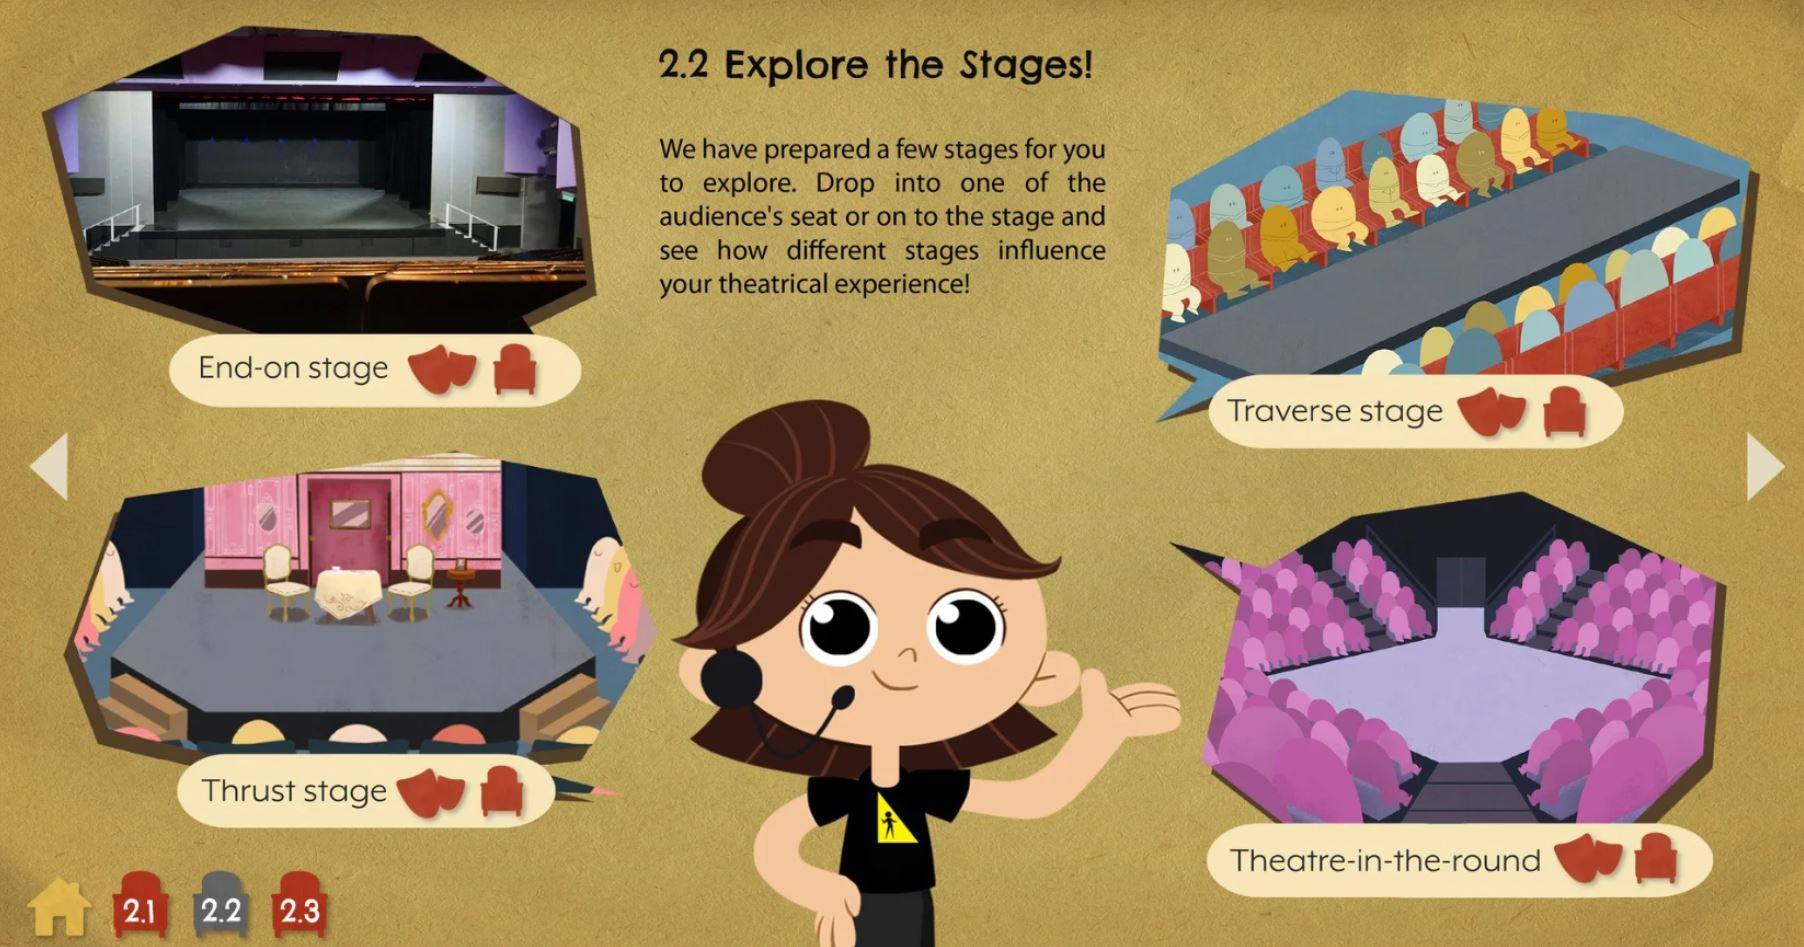 A Young Person’s Guide to the Theatre teaches all about the performing arts. Animated videos show how different types of stages are used for different purposes.